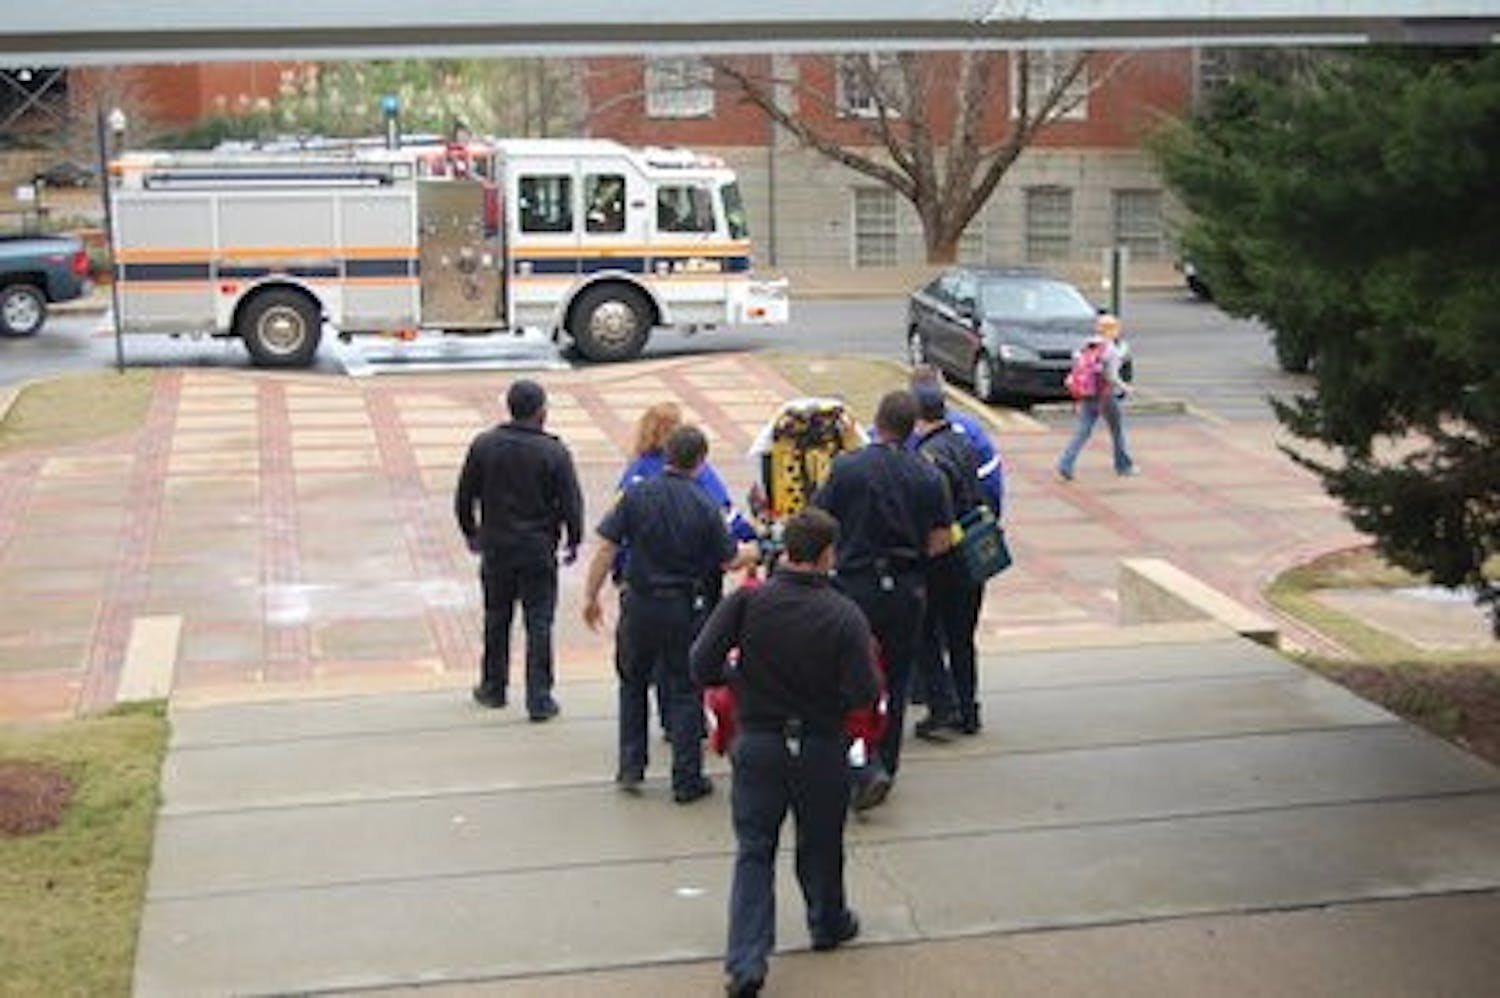 Firefighters and paramedics escort the unknown student out of the Haley Center. (Nathan Simone / MANAGING EDITOR)